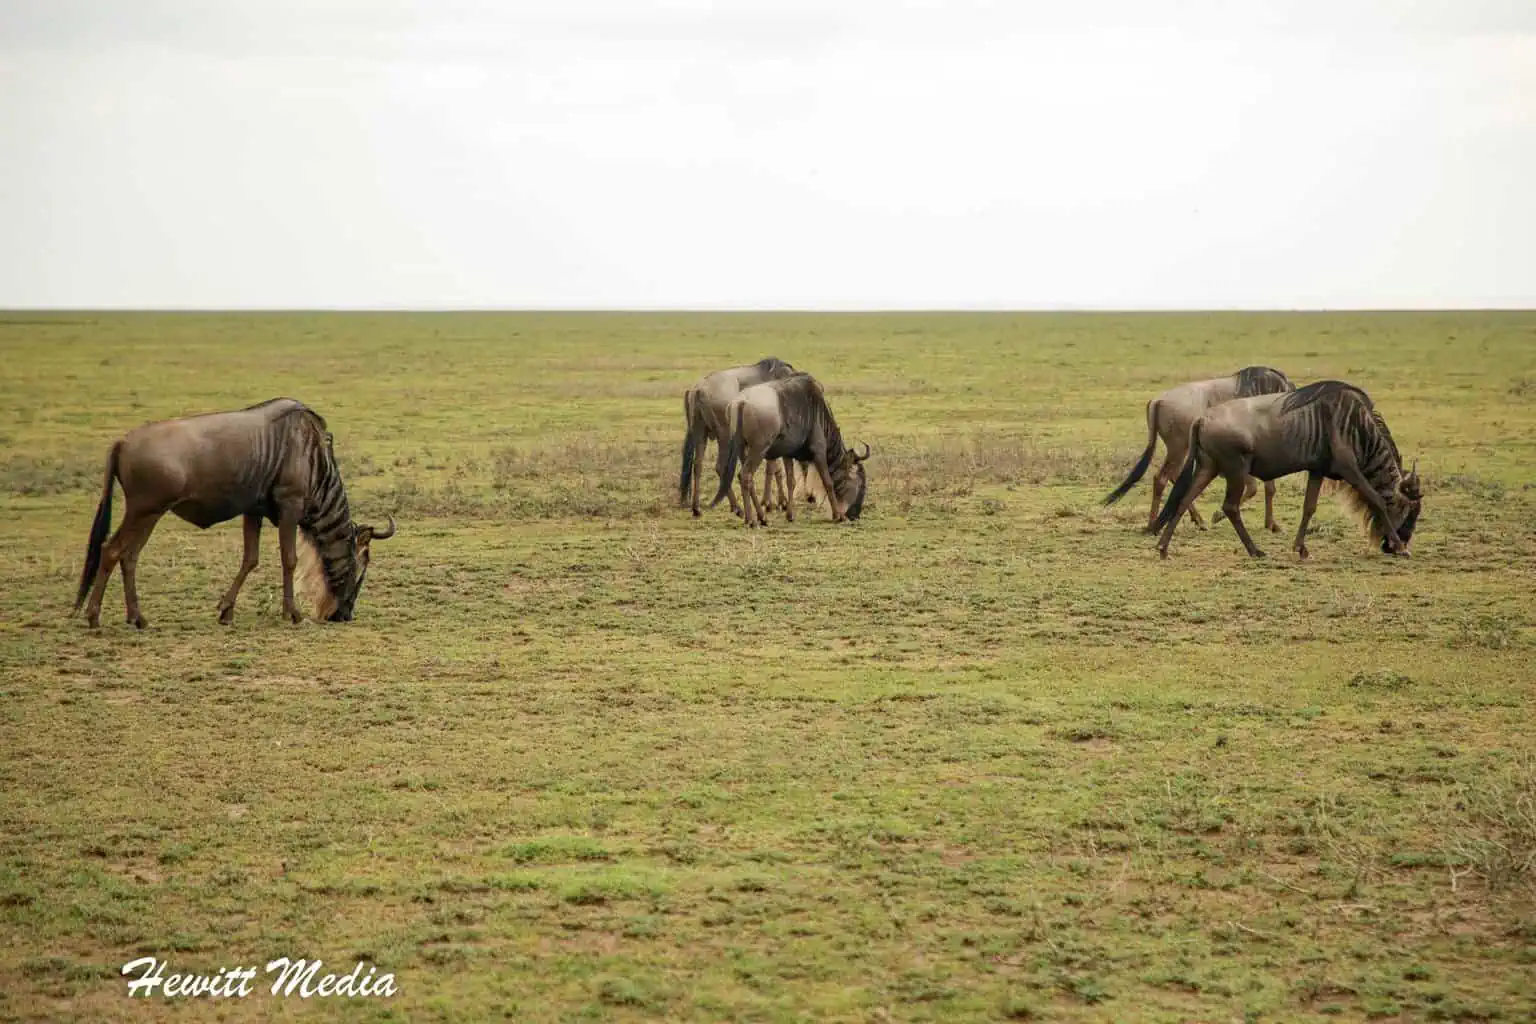 Top Travel Experiences - See the Great Wildebeest Migration in the Serengeti